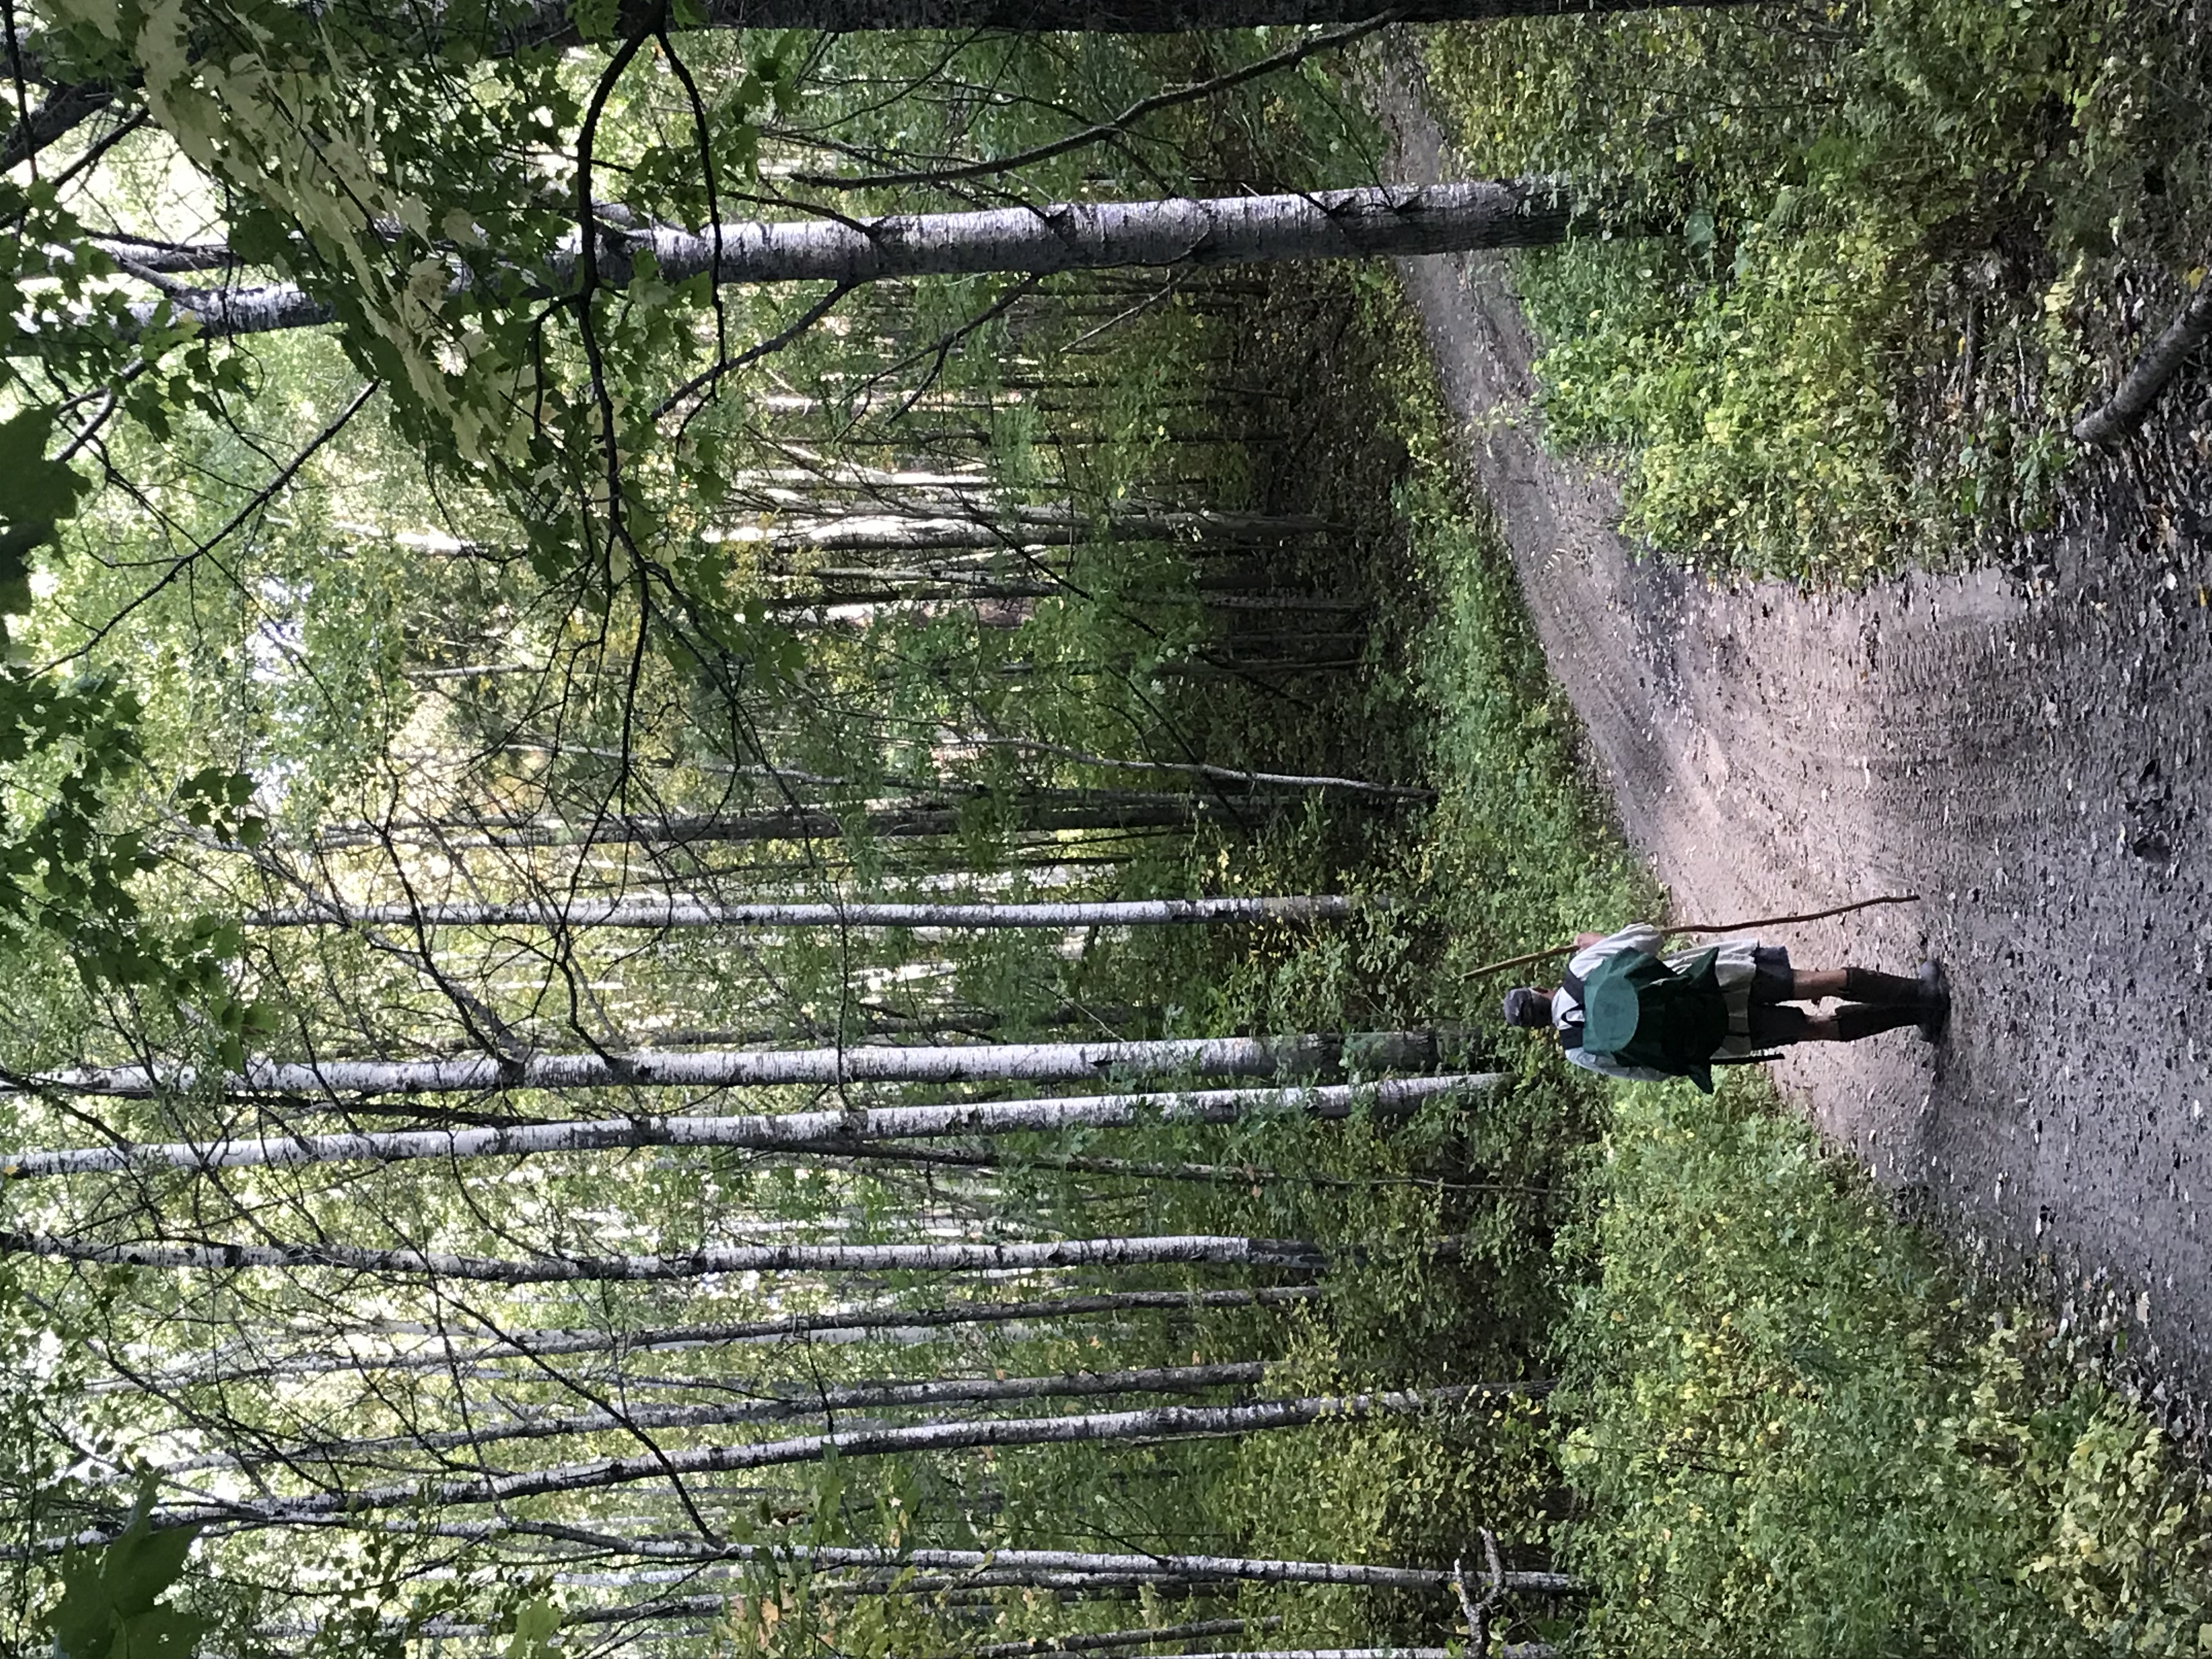 A hiker on a forest road.